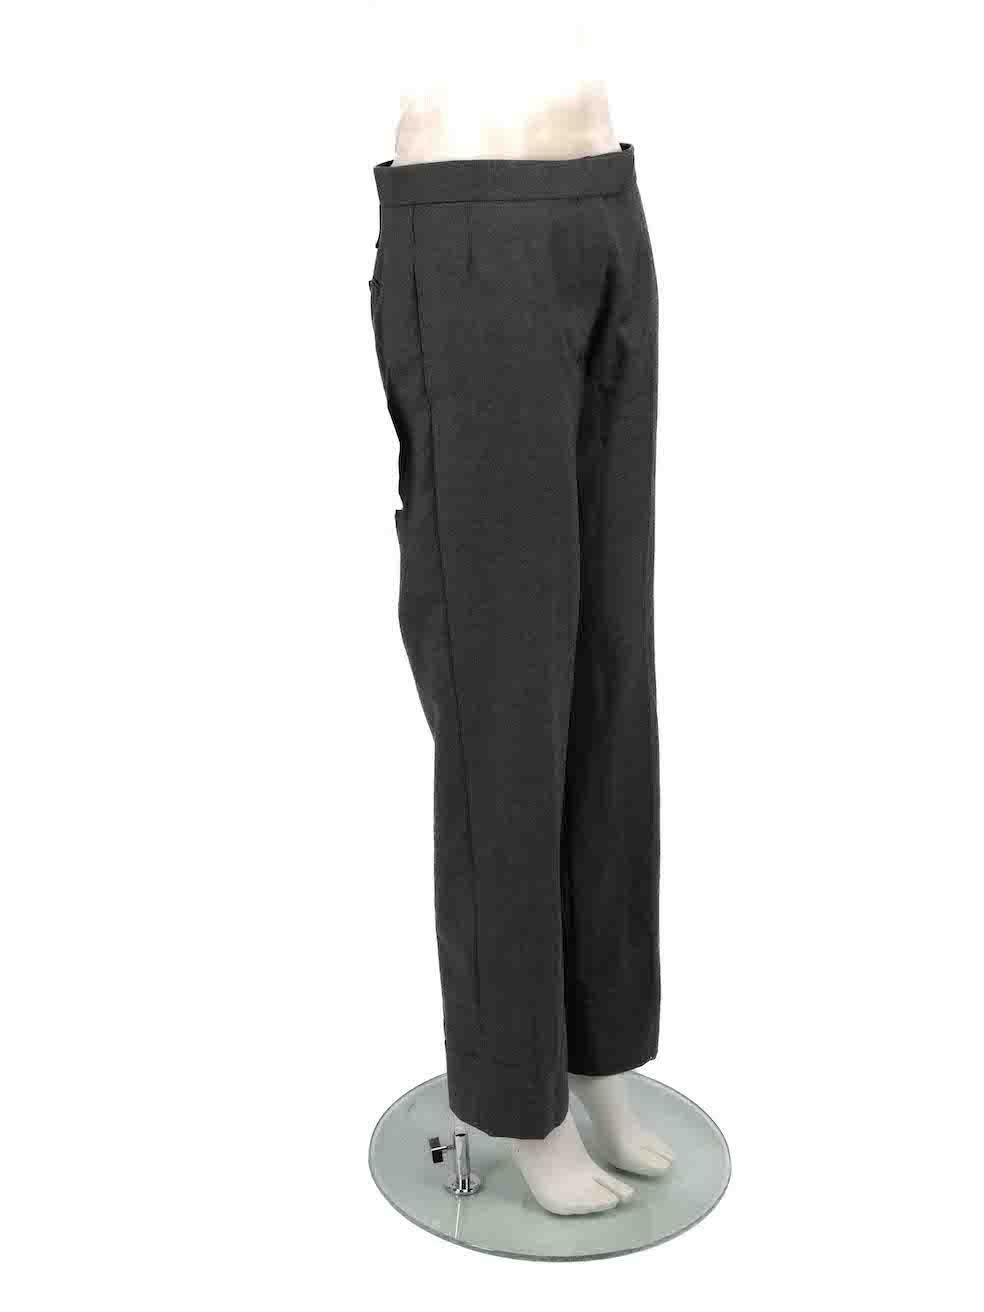 CONDITION is Very good. Hardly any visible wear to trousers is evident on this used Thom Browne designer resale item.
 
 
 
 Details
 
 
 Grey
 
 Wool
 
 Trousers
 
 Straight leg
 
 High rise
 
 Side stripe detail
 
 2x Side pockets
 
 2x Back